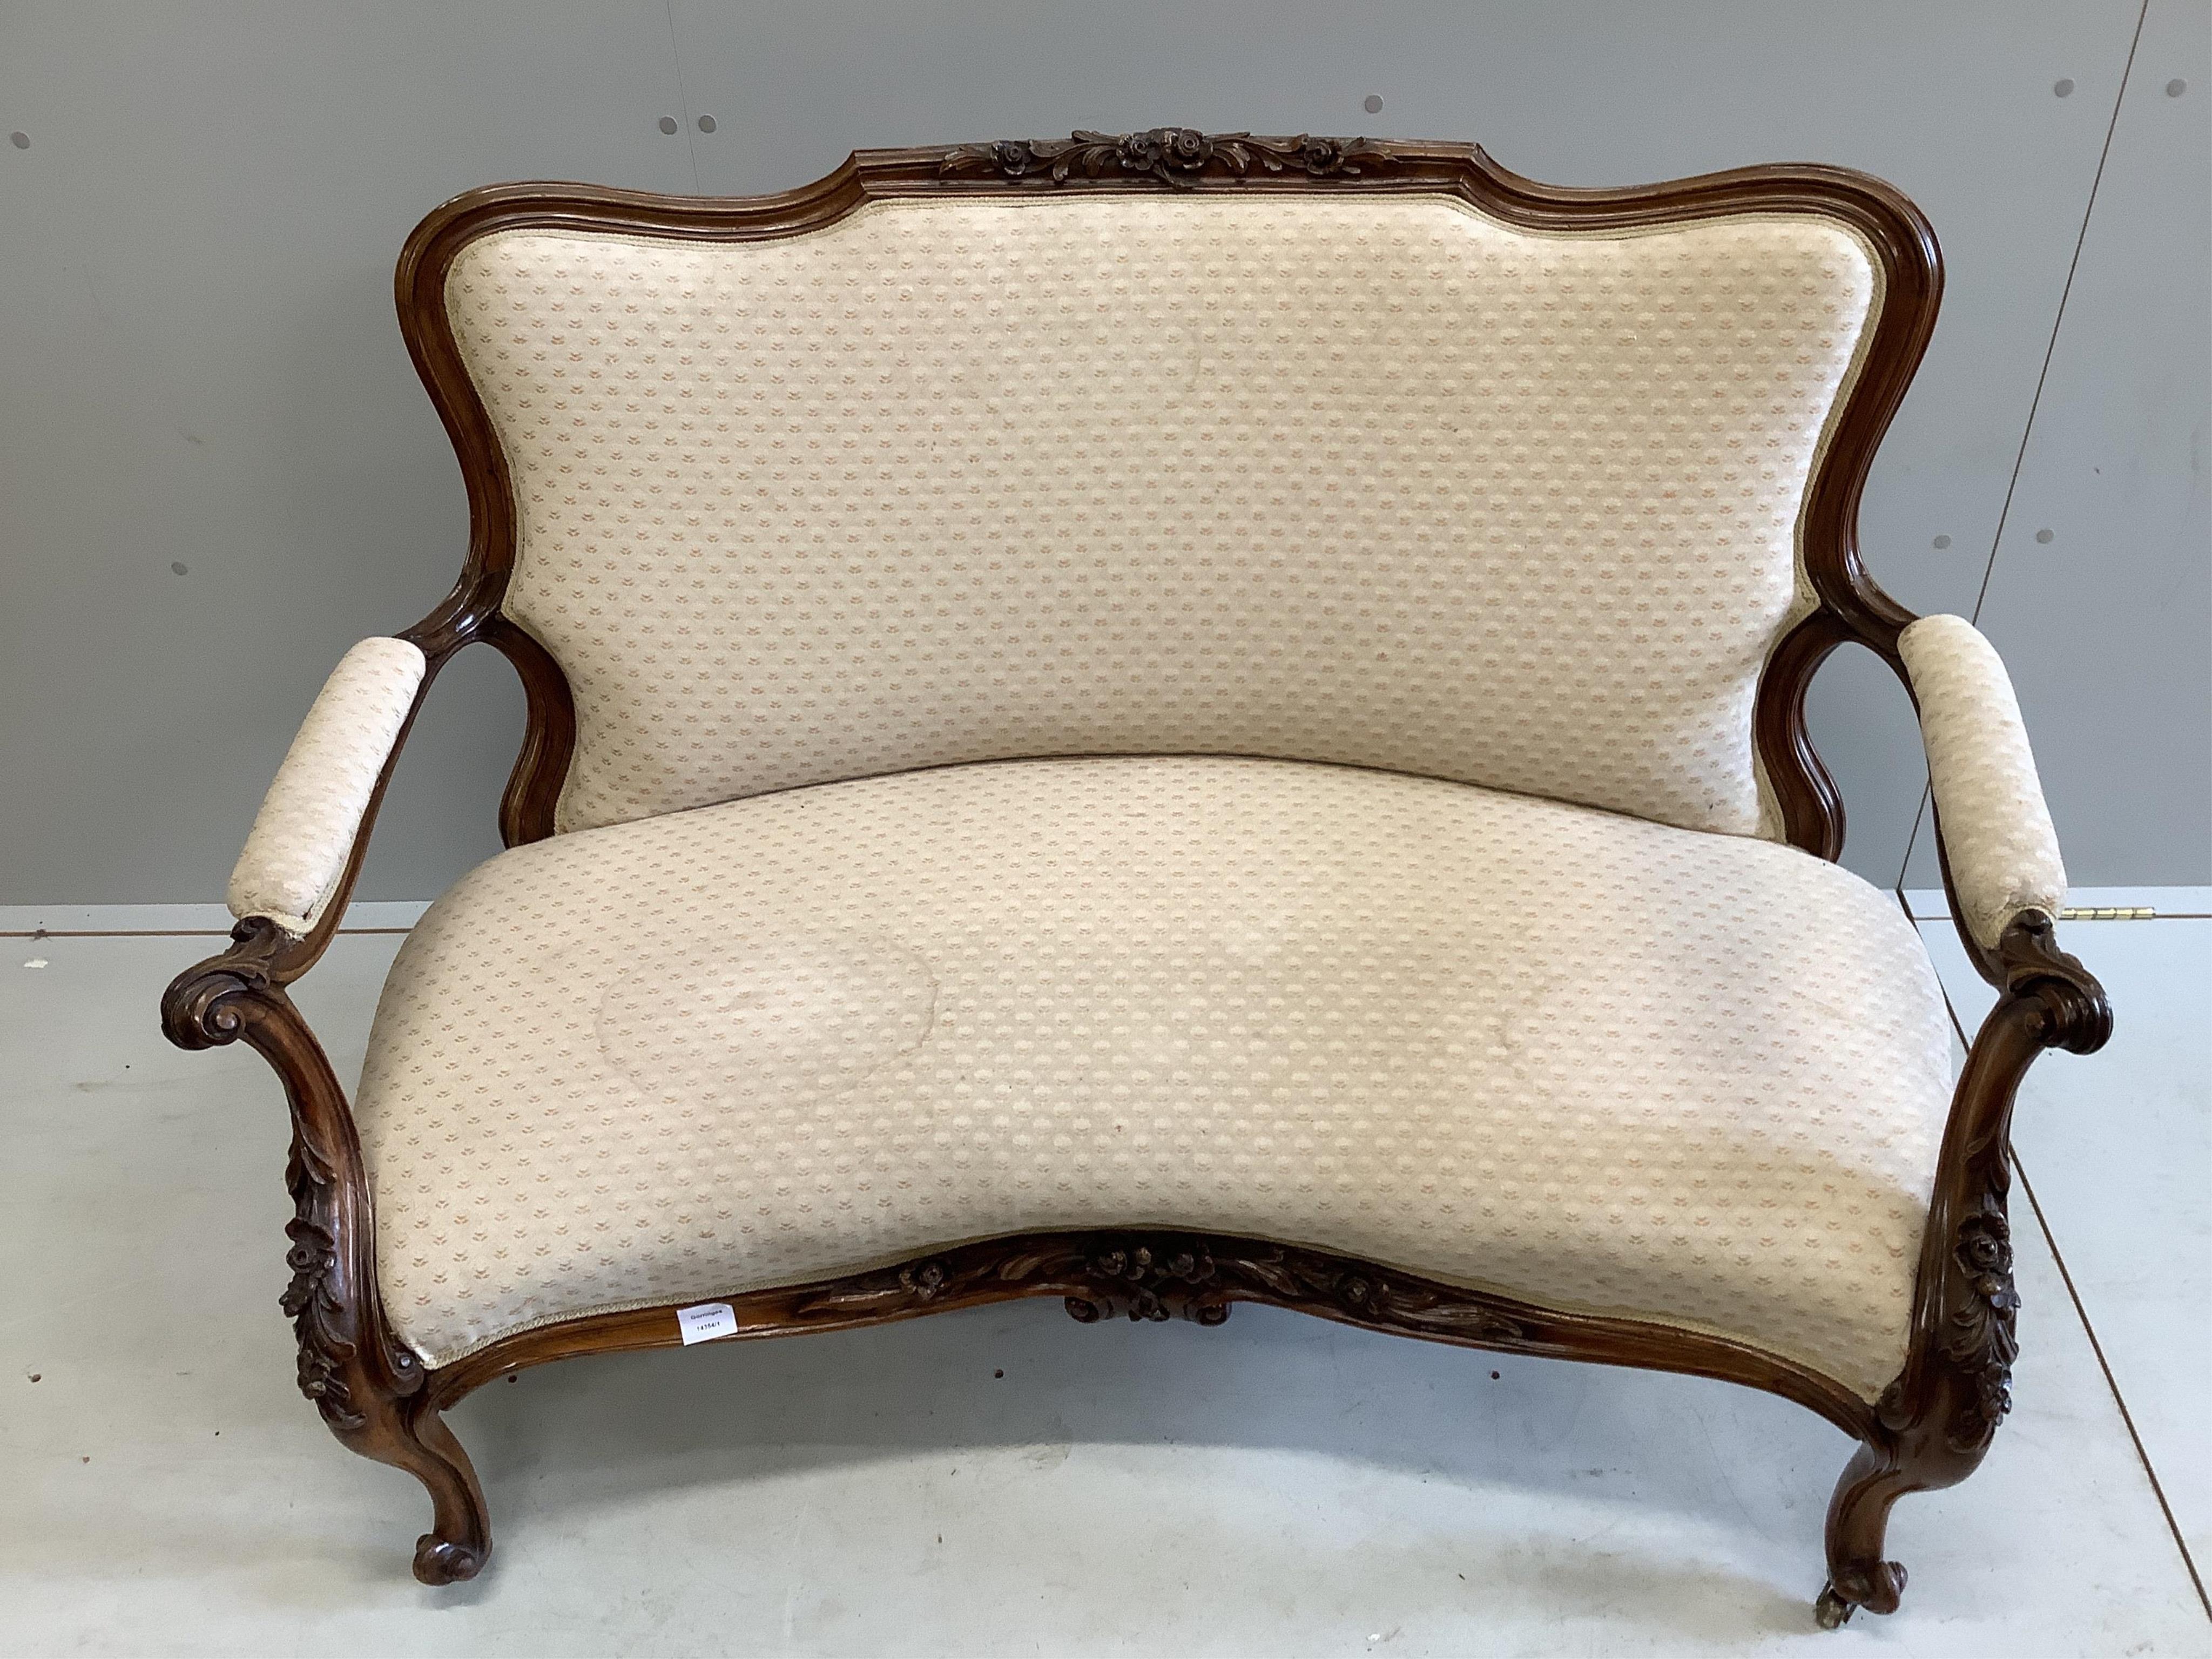 A Victorian rosewood two seater settee, width 130cm, depth 70cm, height 90cm. Condition - fair